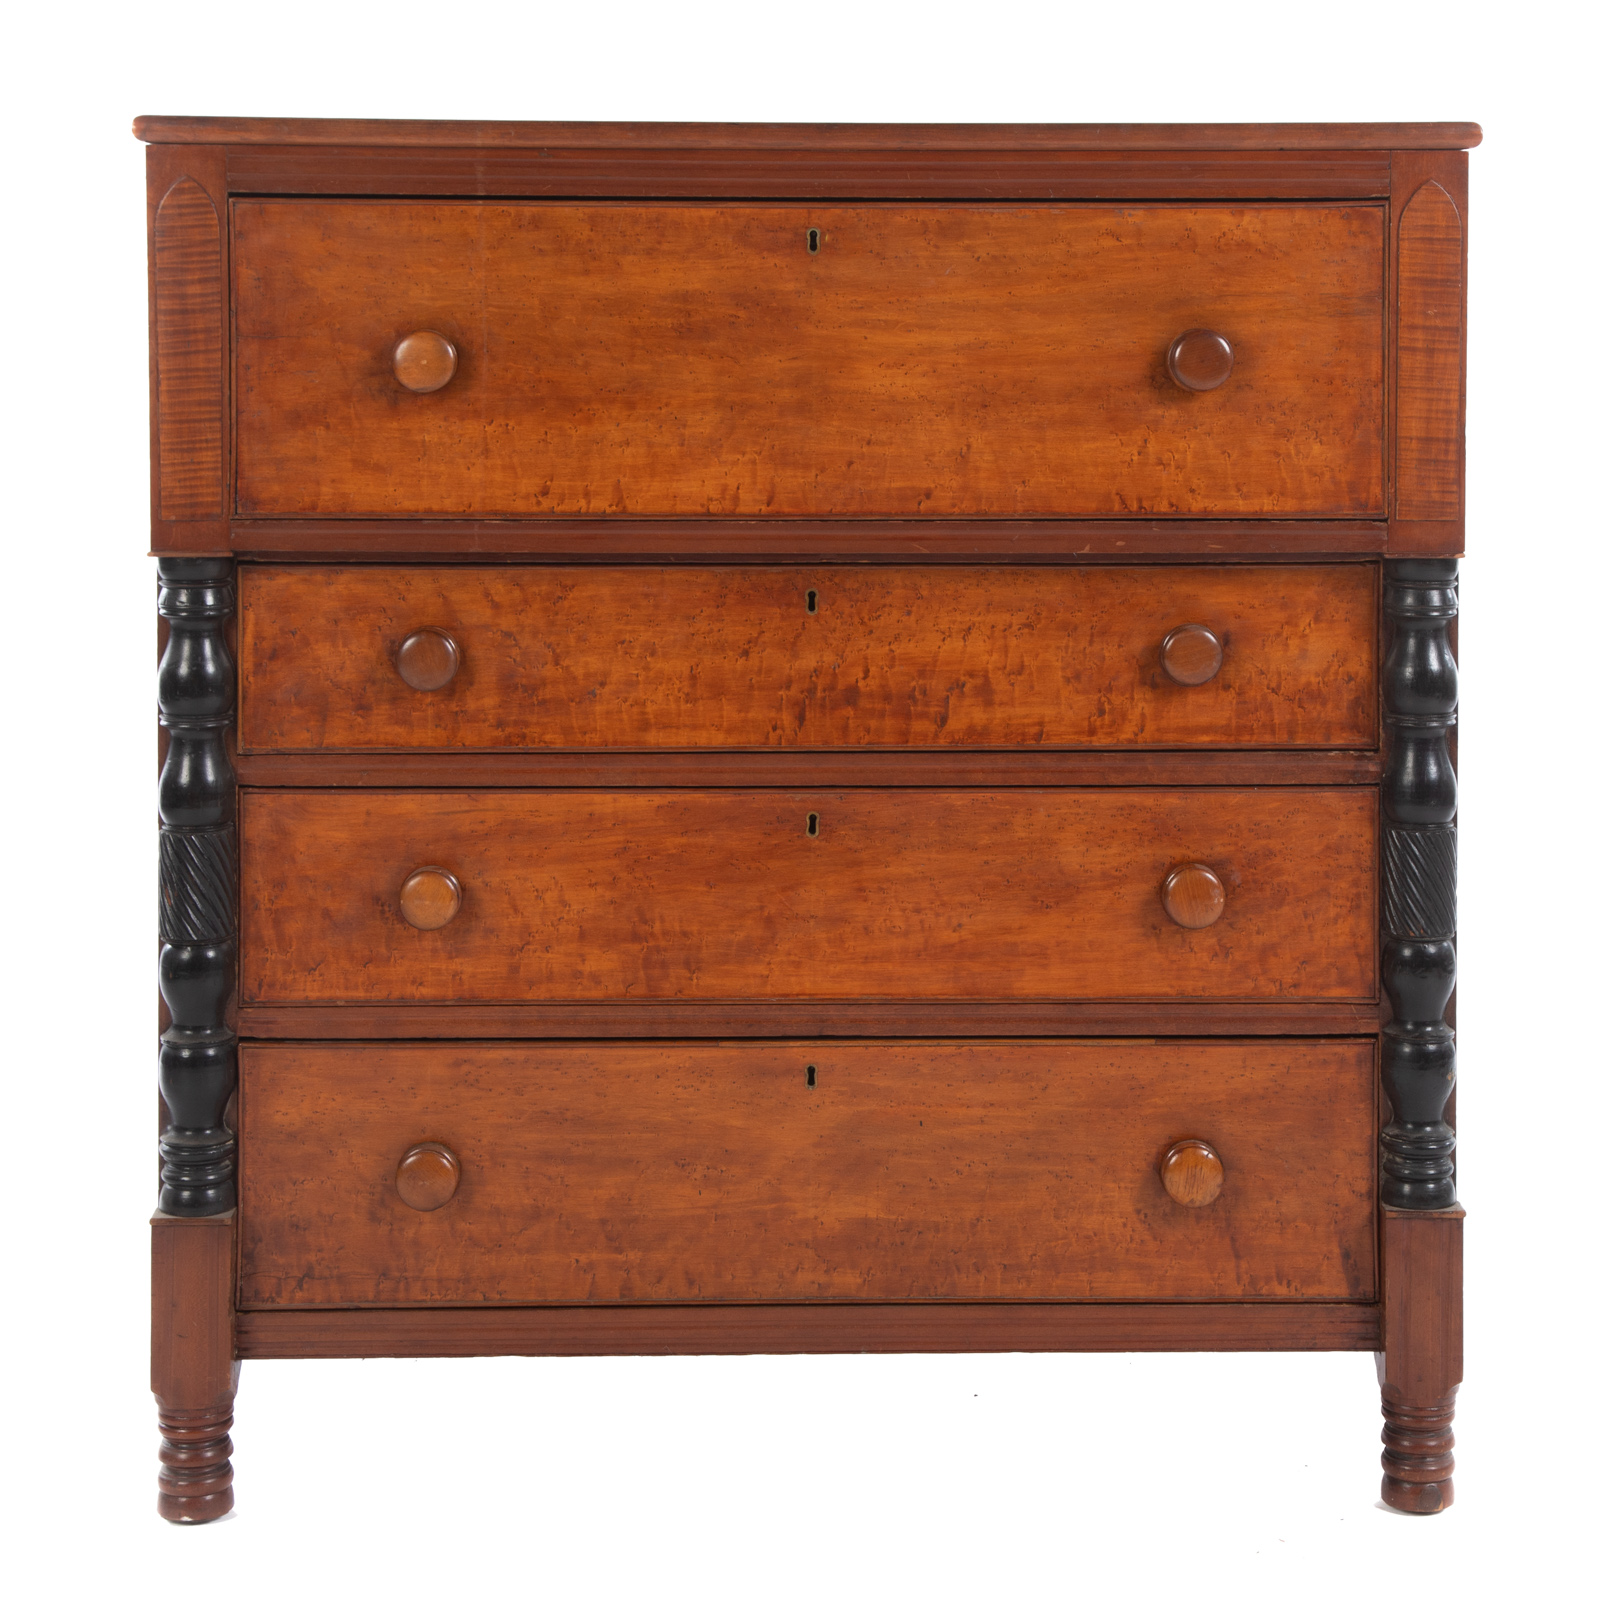 AMERICAN CLASSICAL MIXED WOOD CHEST 287253